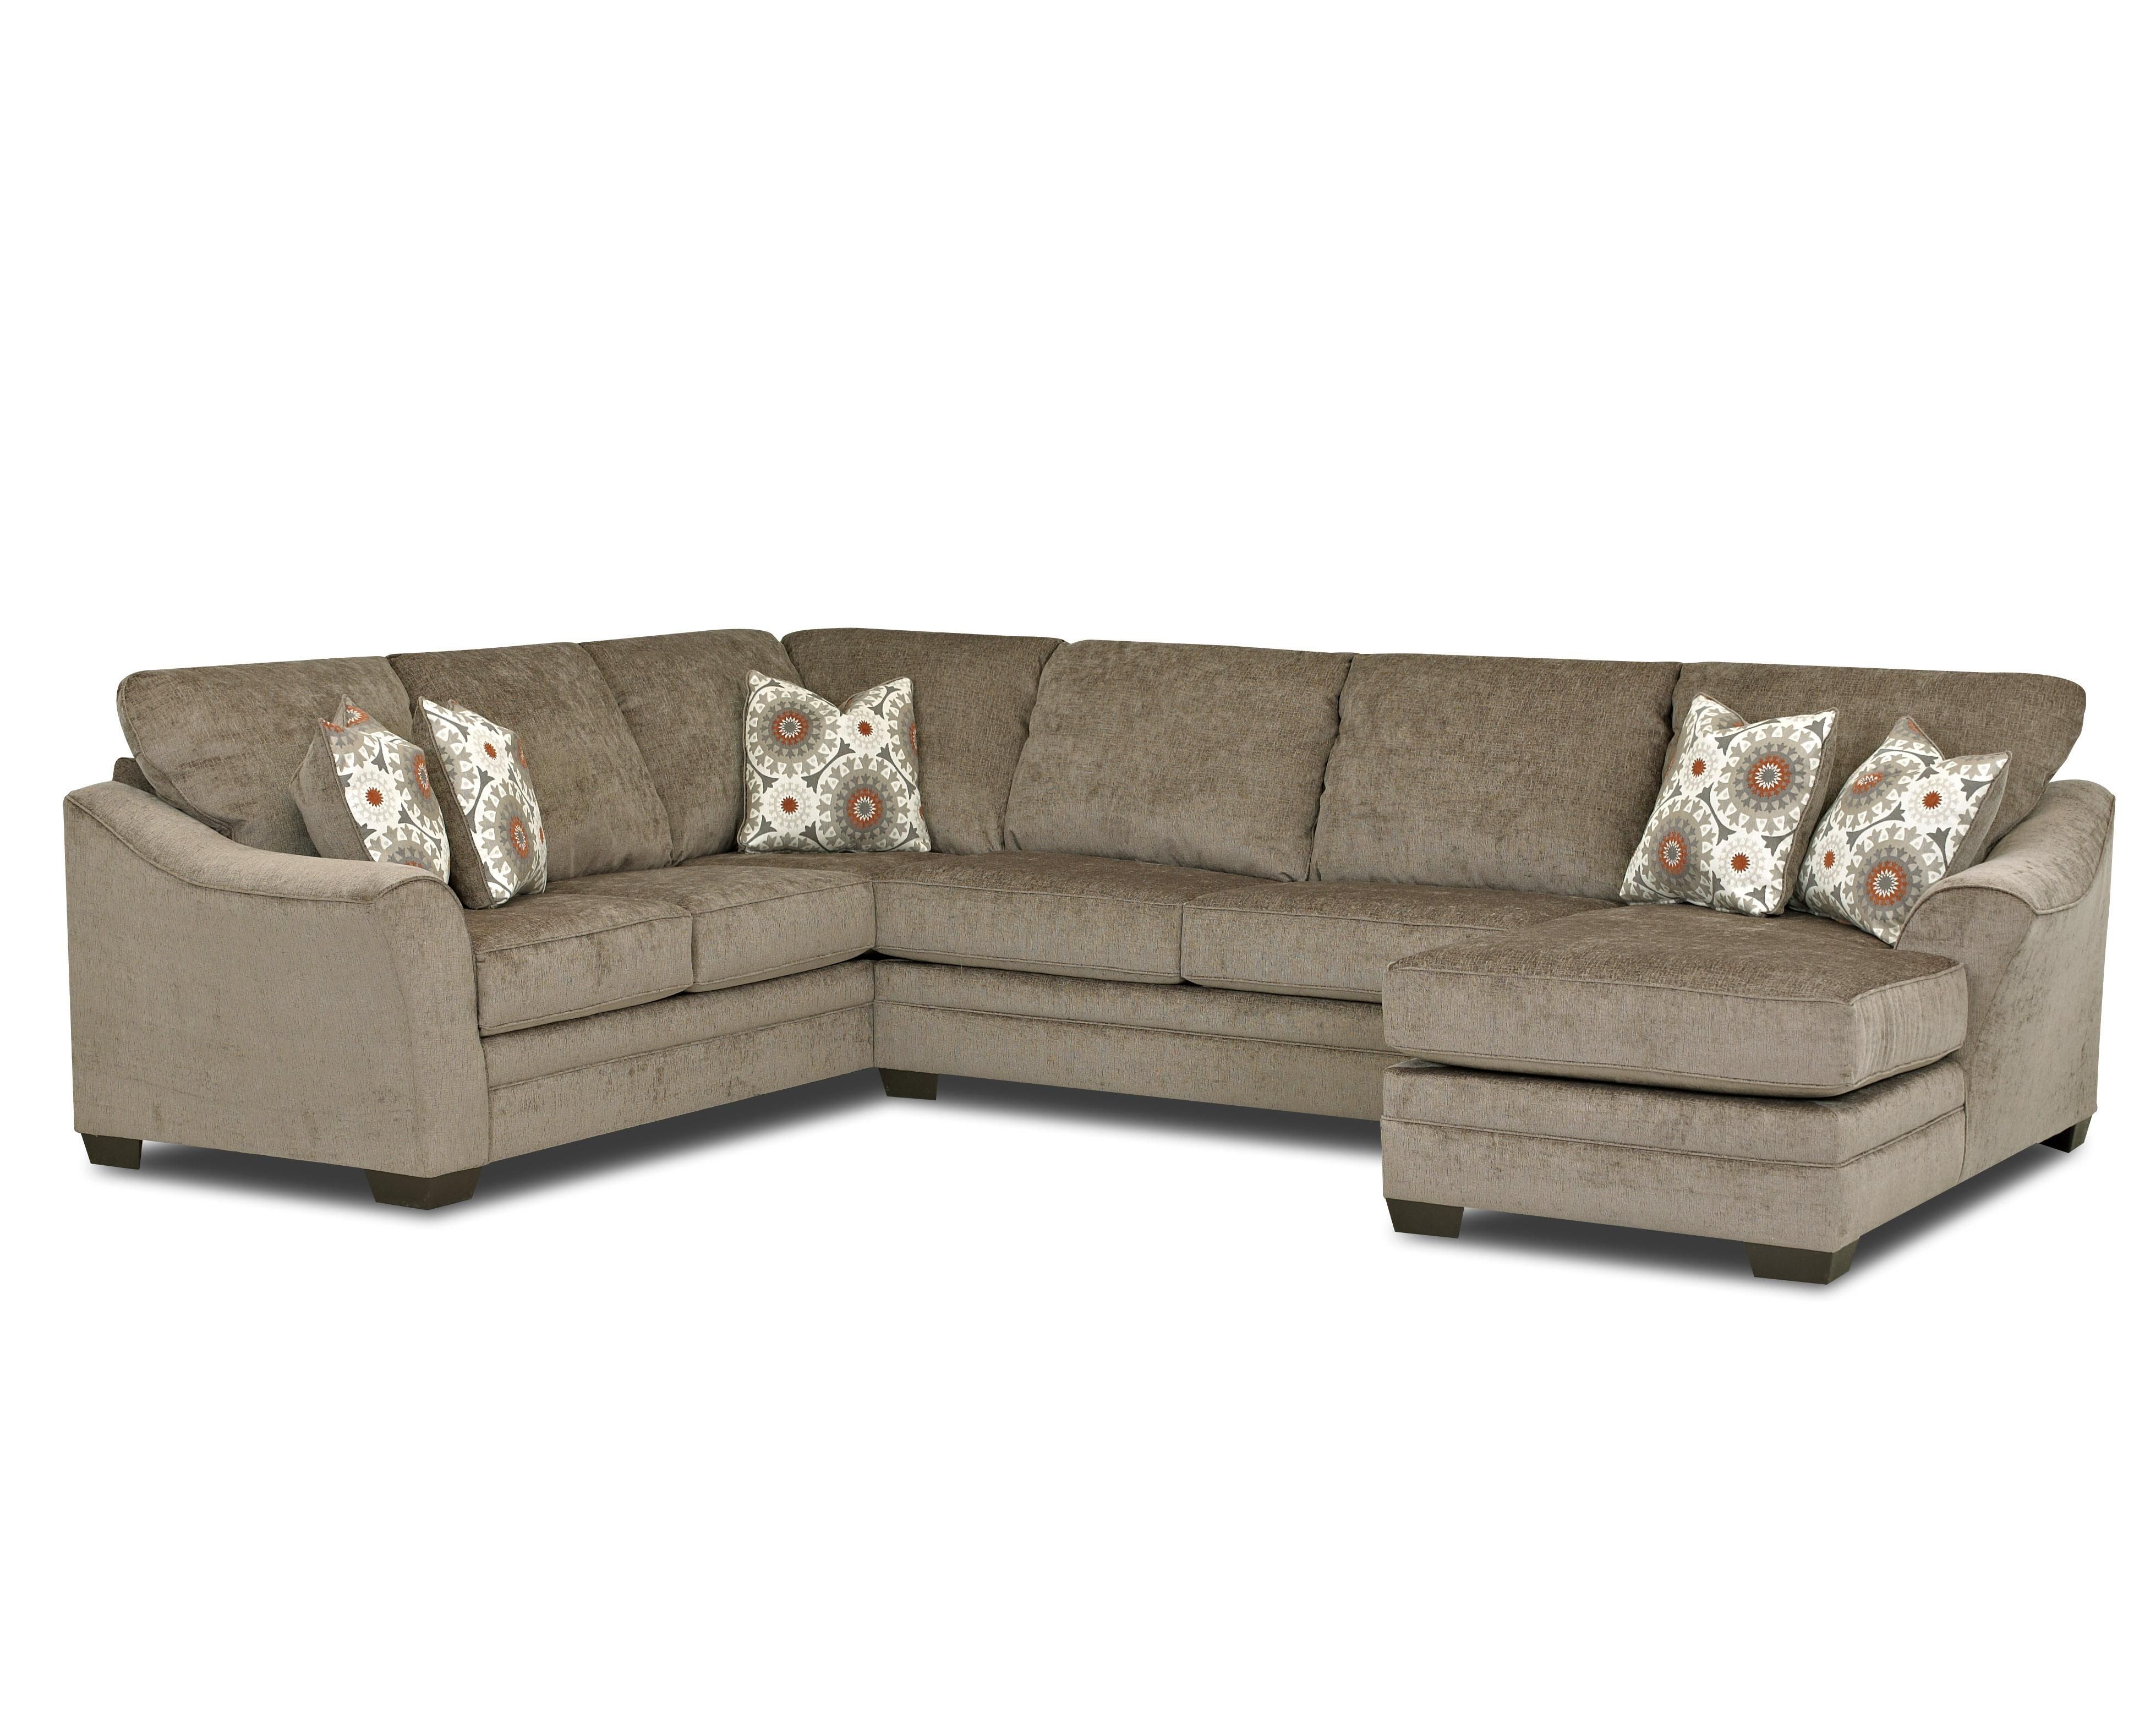 Klaussner Heston Contemporary Sectional Sofa With Flared, Sloped Throughout Johnny Janosik Sectional Sofas (View 10 of 10)